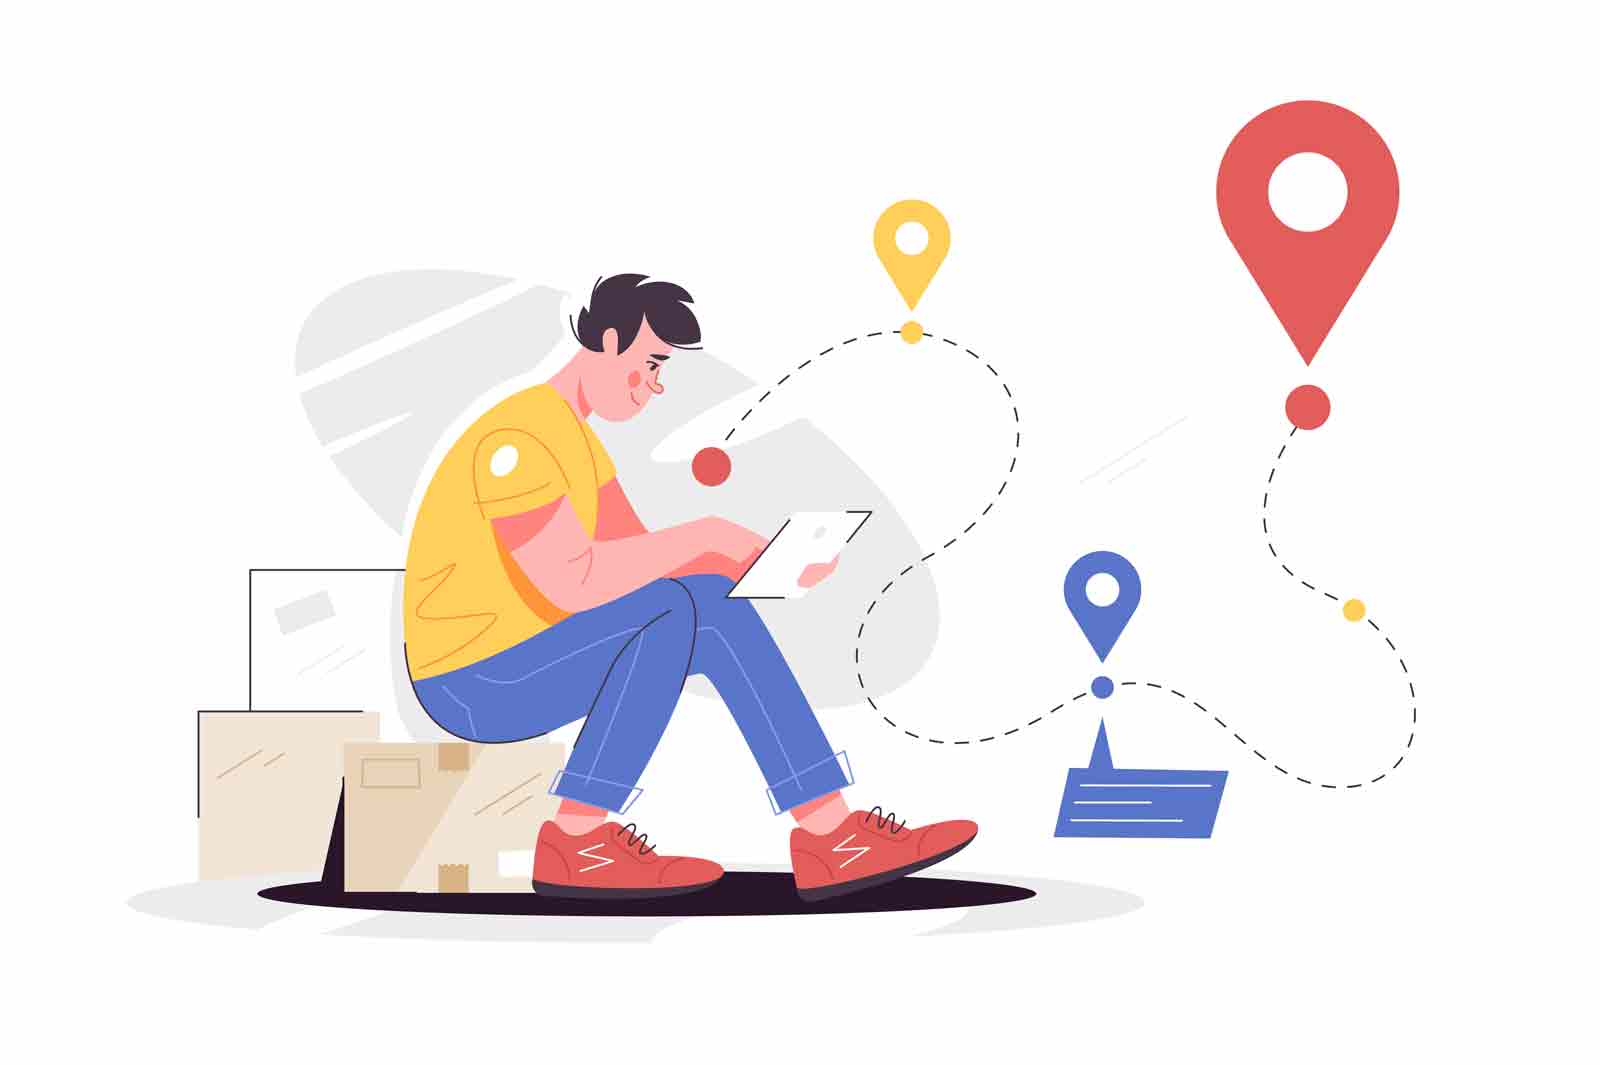 Parcel tracking on mobile phone app vector illustration. Guy use app to find faster current location his parcel,  flat style.